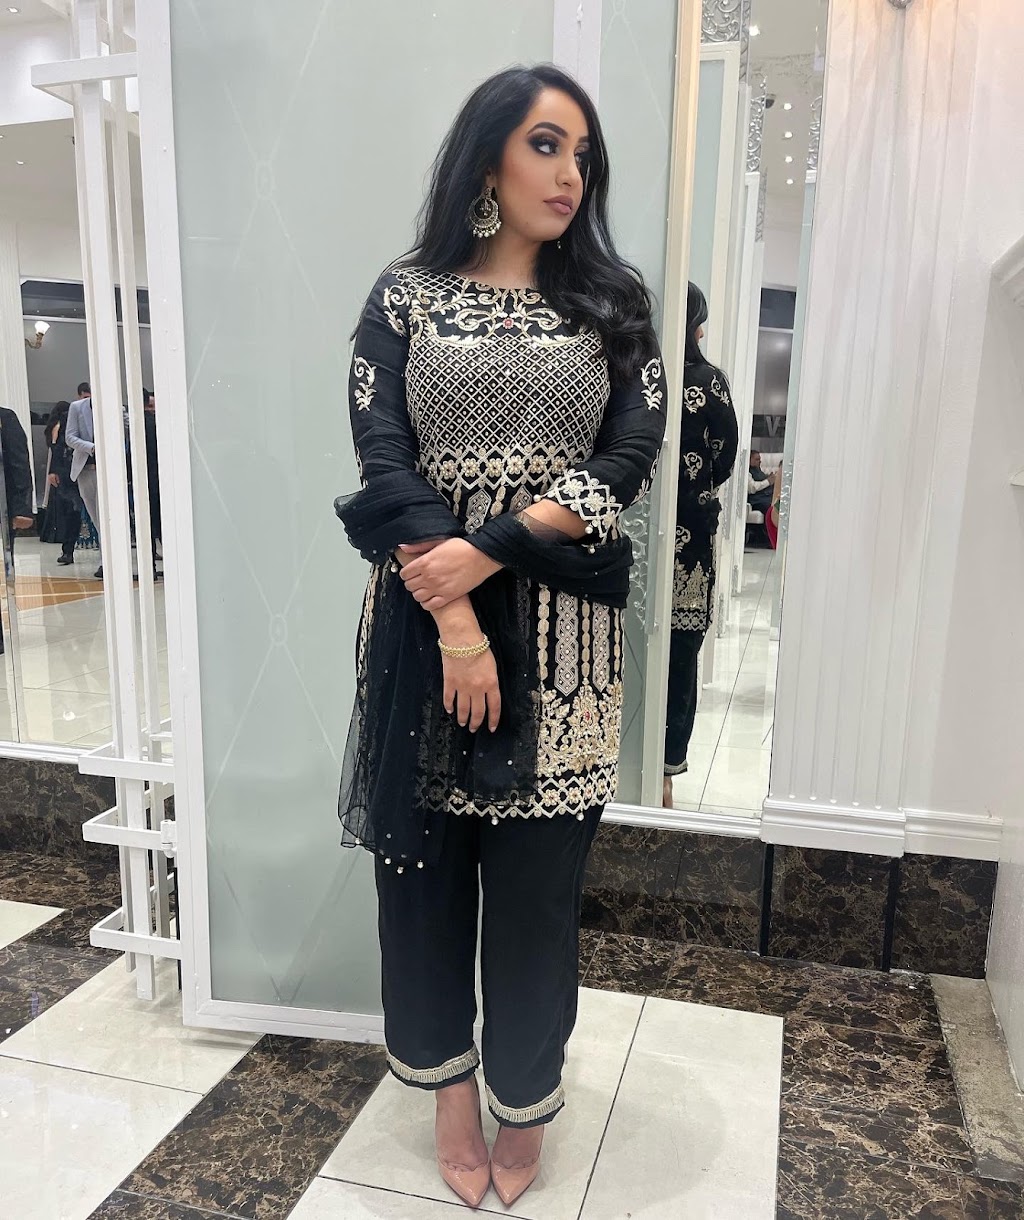 Uzma Collection | 3718 Rochester Rd, Troy, MI 48083 | Phone: (248) 835-4864